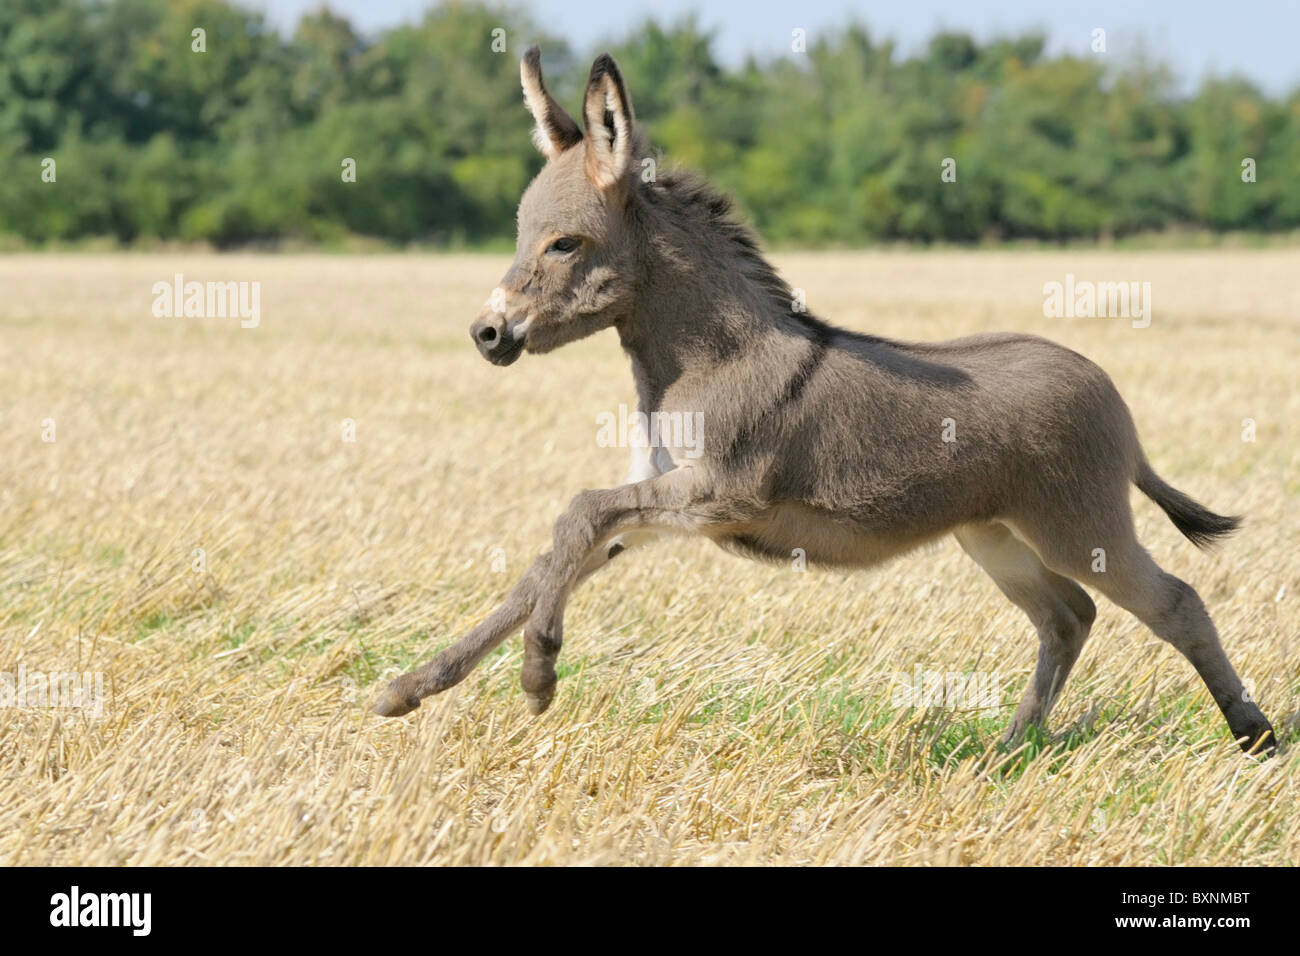 Donkey foal galloping in a field Stock Photo